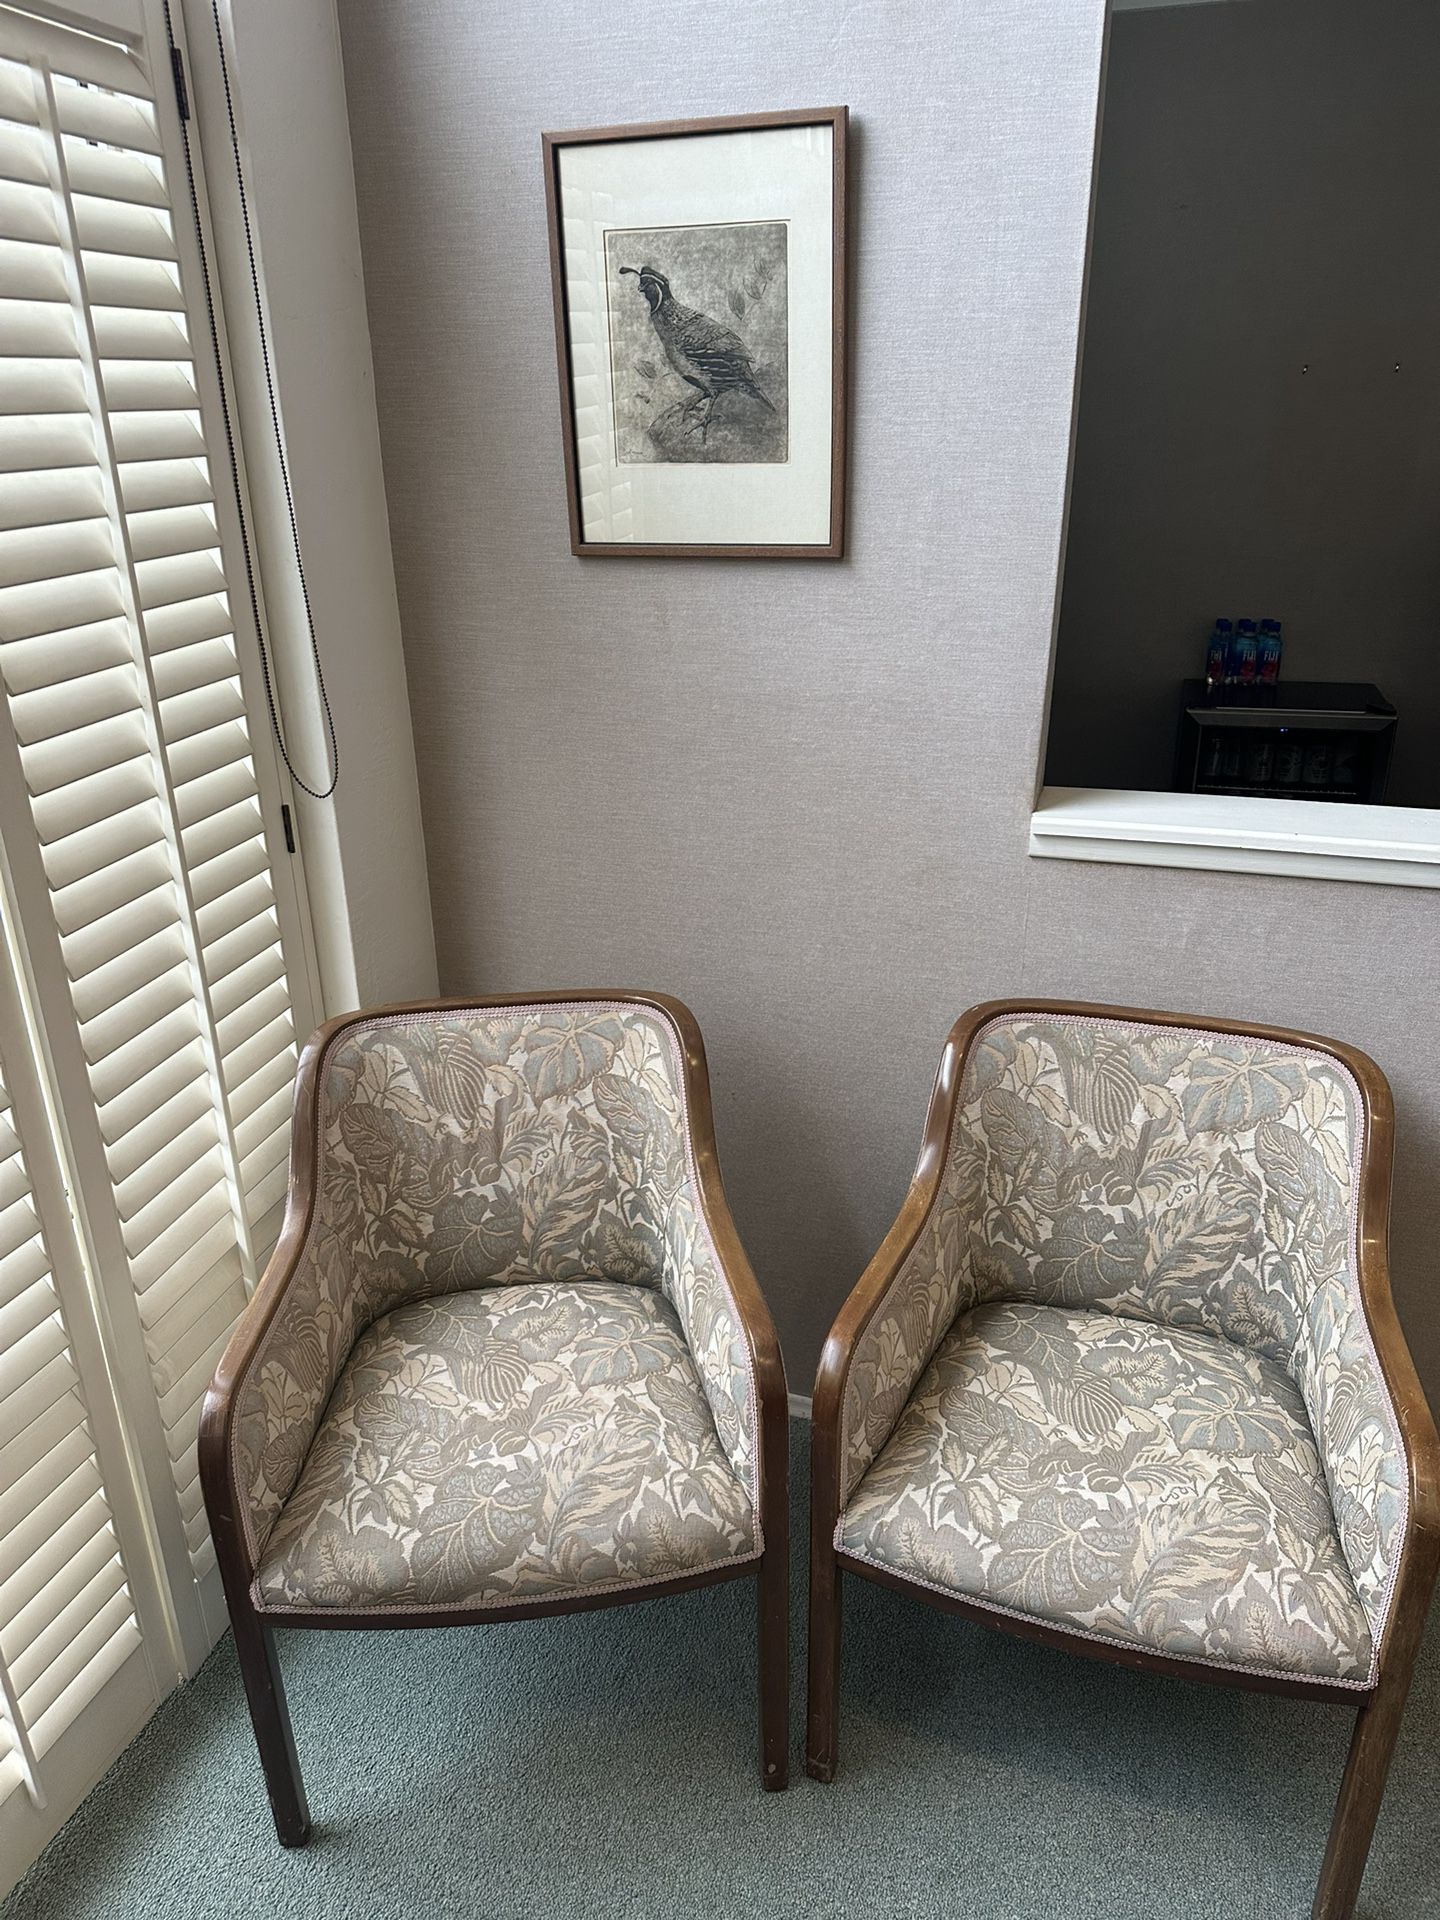 Vintage Matching Chairs - 2